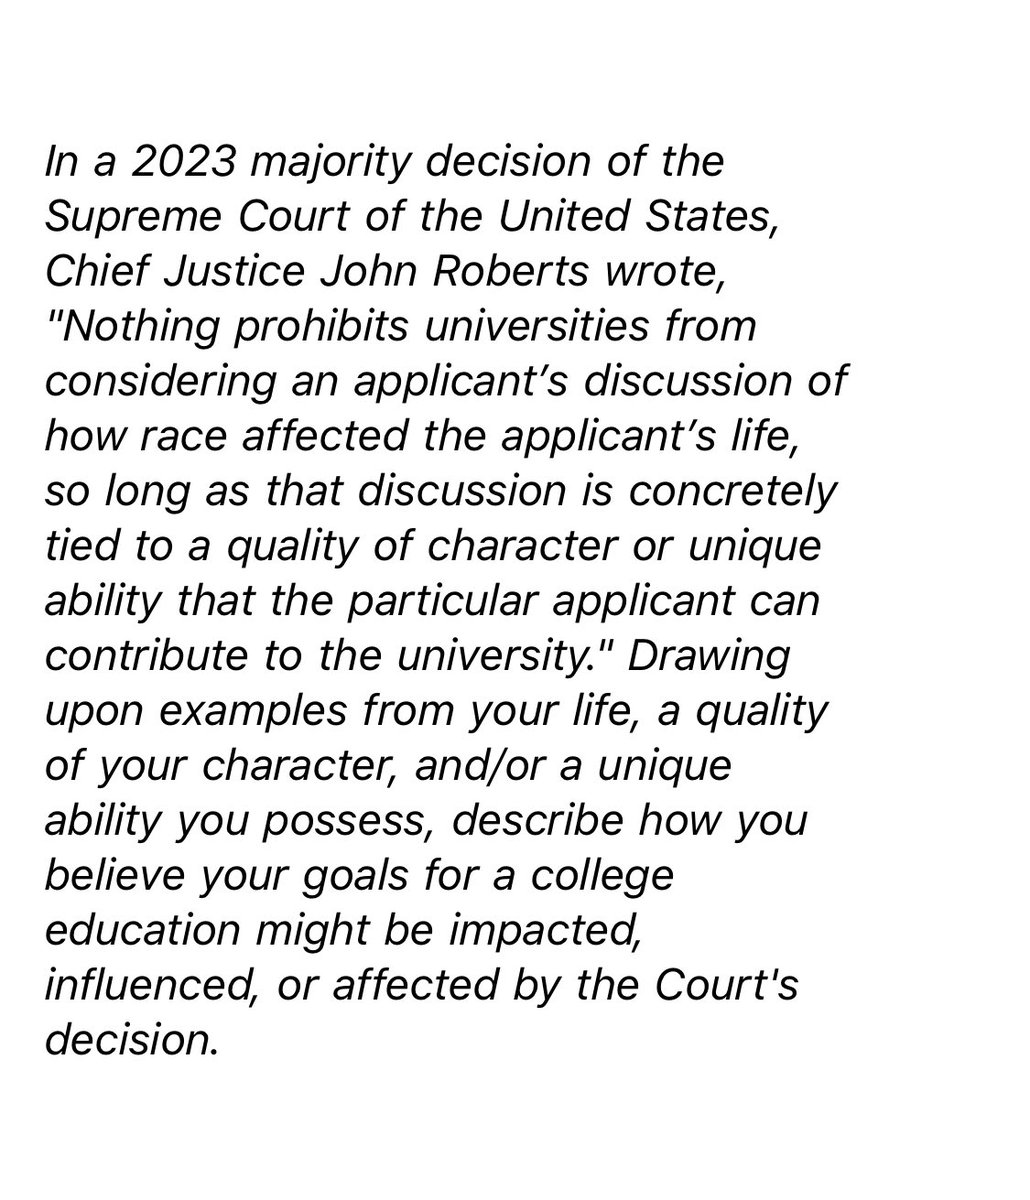 In response to the end of affirmative action, Sarah Lawrence, a private liberal arts college in Yonkers, added the following admissions essay prompt. It’s one of three options applicants can choose from: